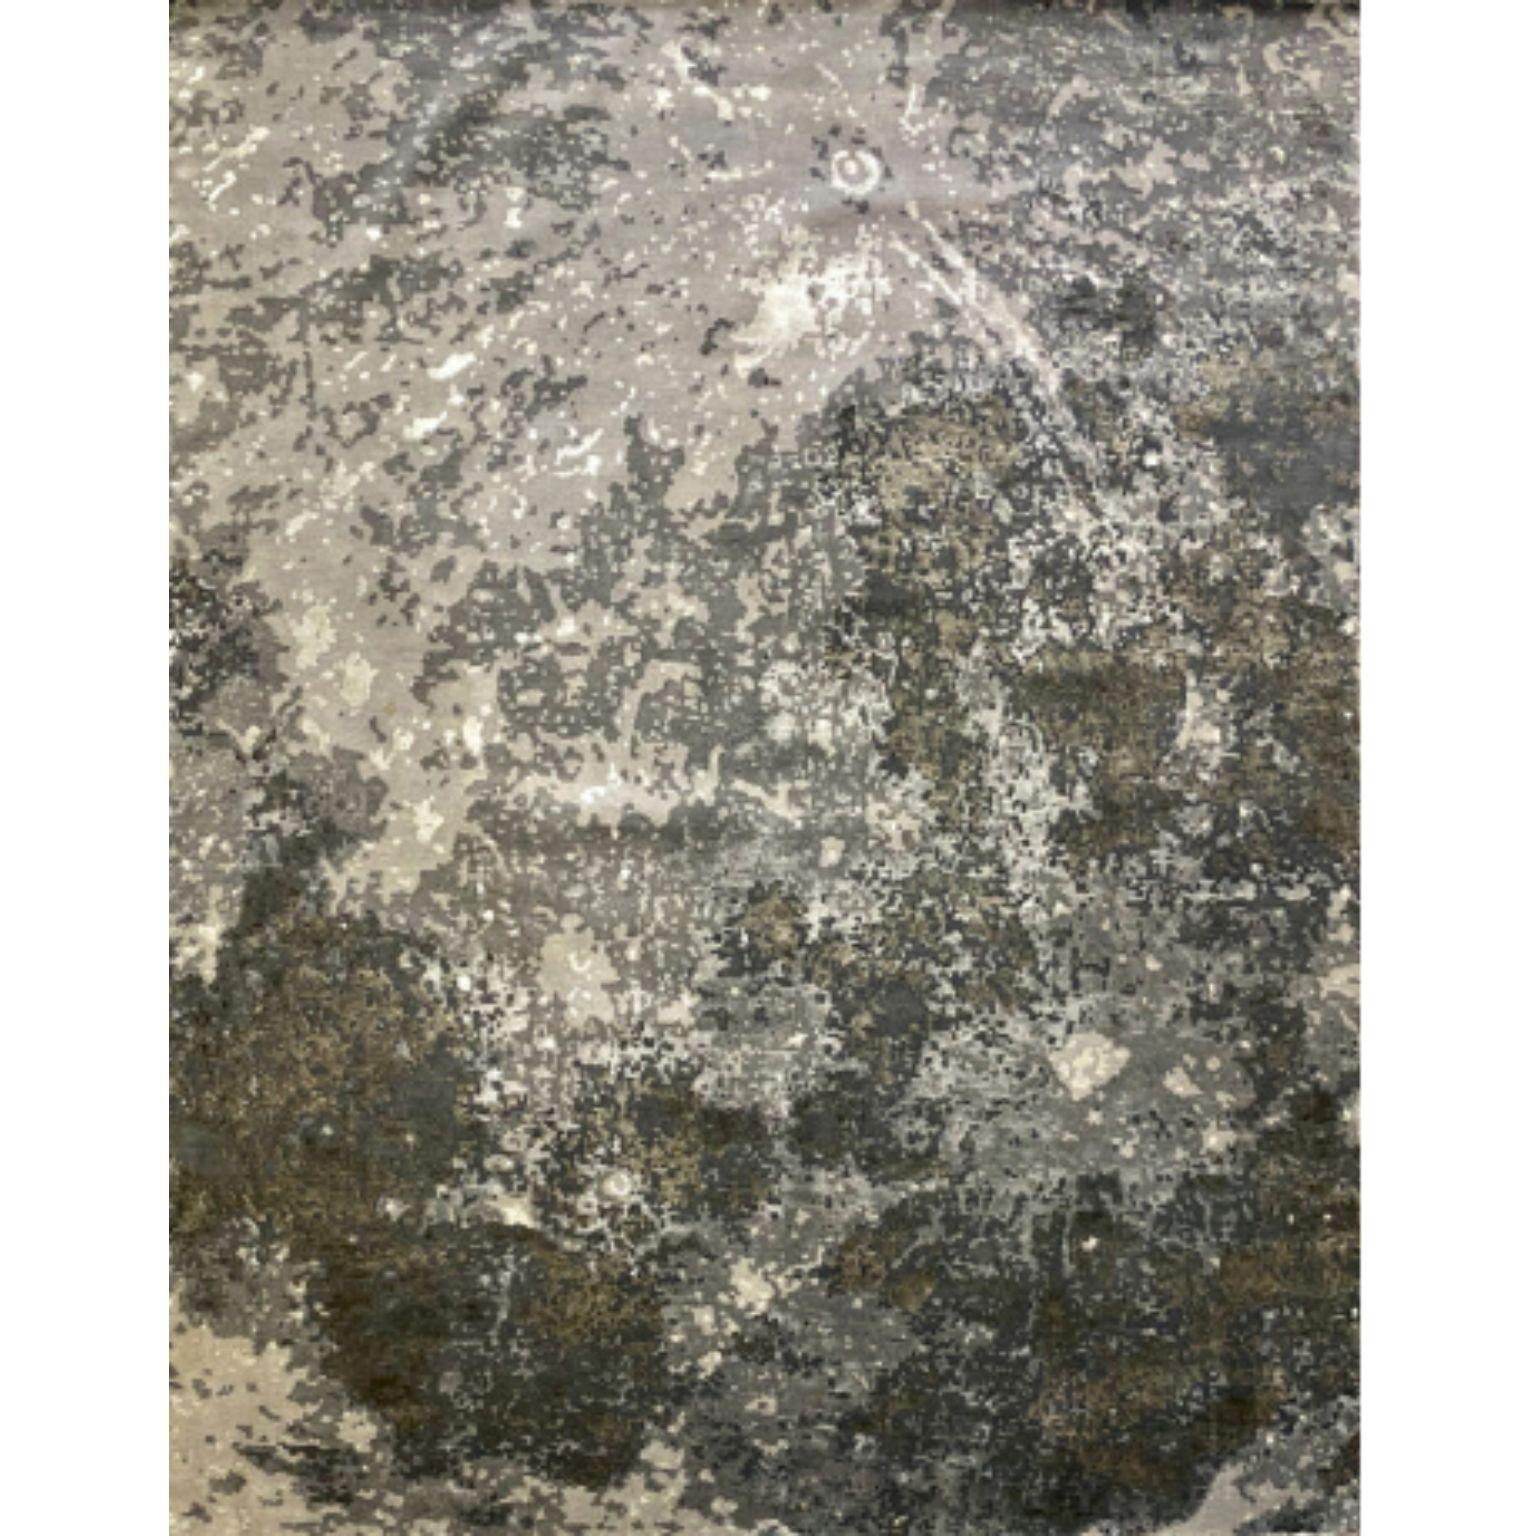 MOON 200 rug by Illulian
Dimensions: D300 x H200 cm 
Materials: Wool 50%, Silk 50%
Variations available and prices may vary according to materials and sizes.

Illulian, historic and prestigious rug company brand, internationally renowned in the